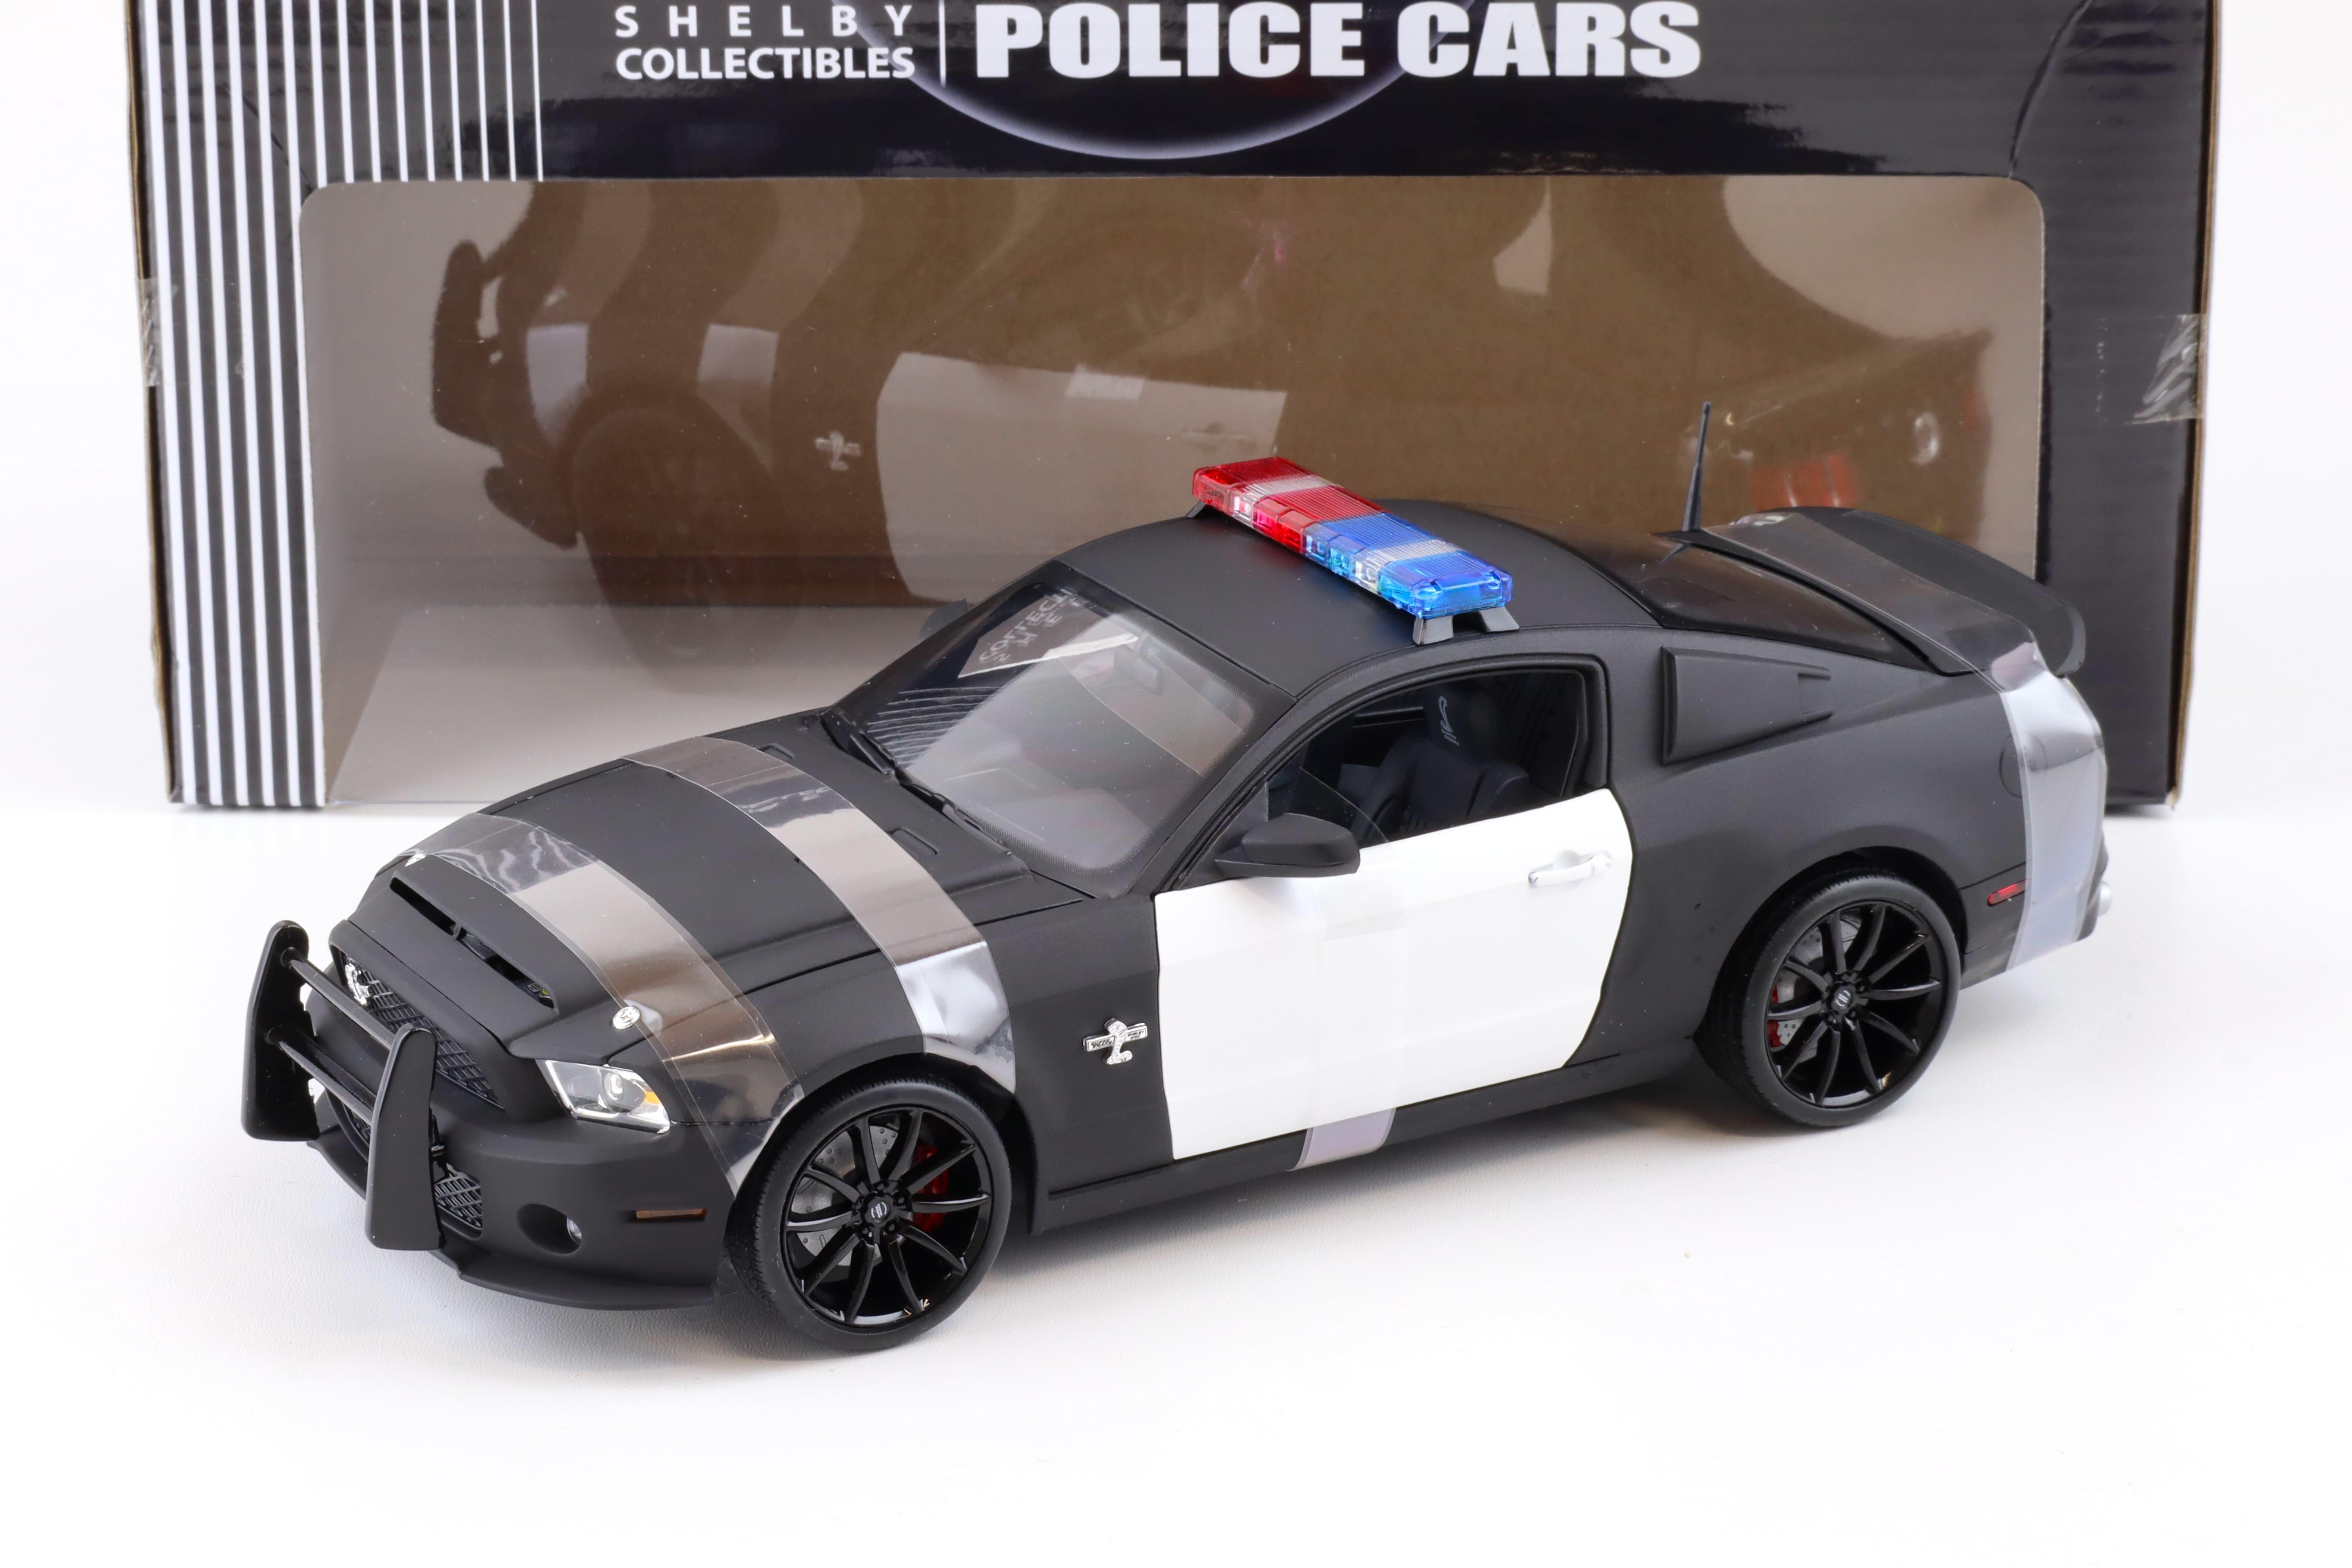 1:18 Shelby Collectibles 2012 Ford Shelby GT500 Super Snake Police black/ white